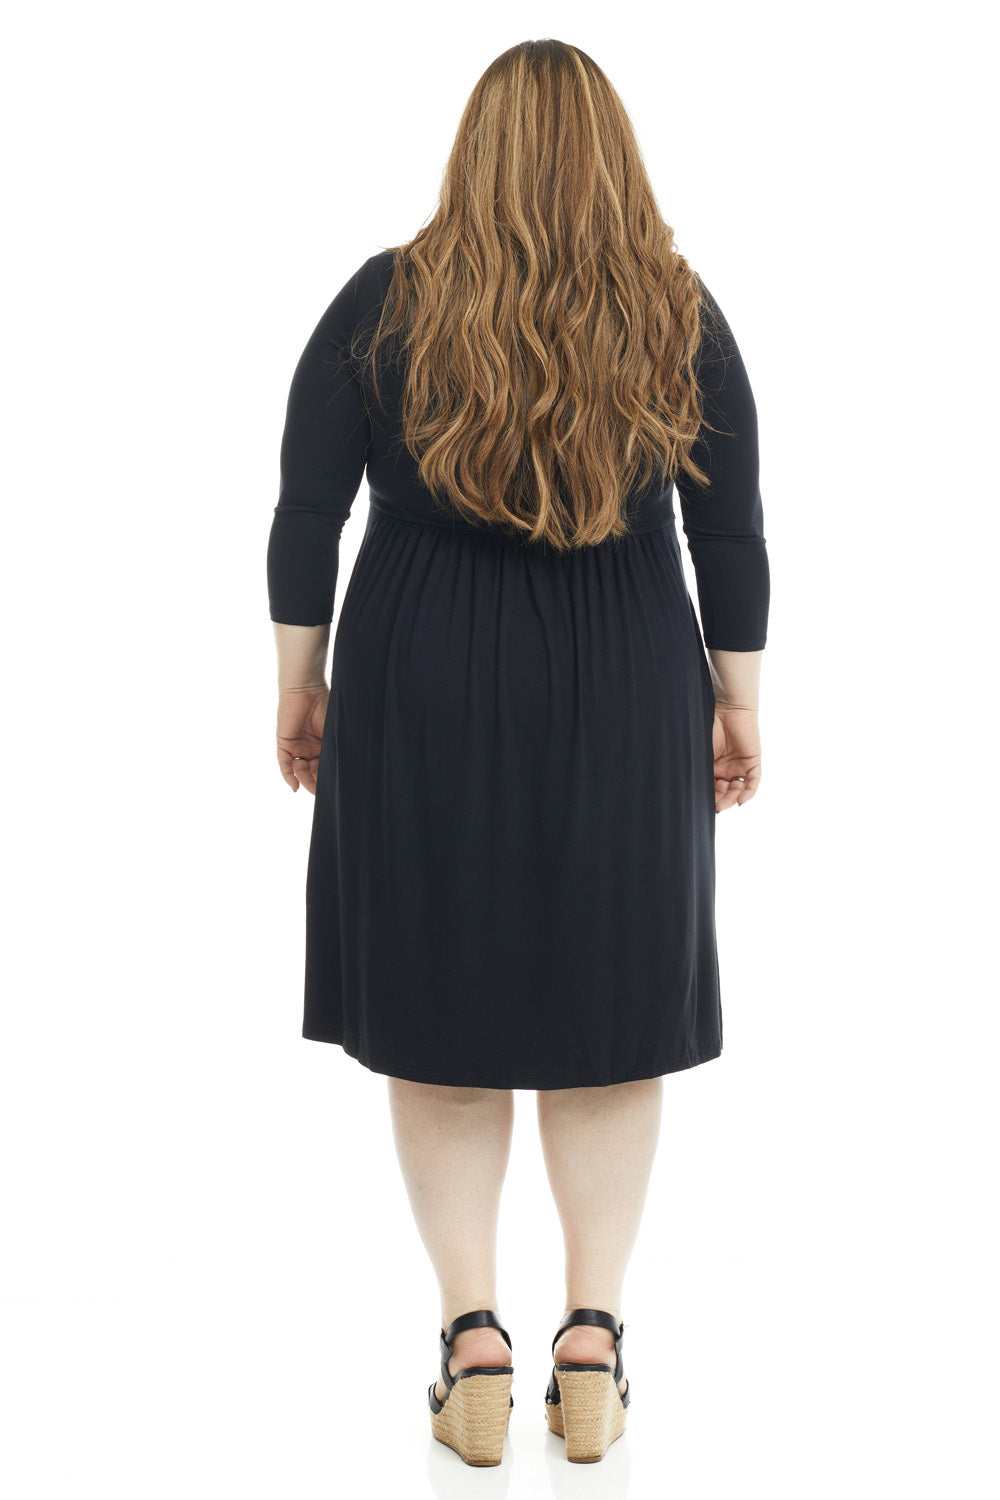 modest 3/4 sleeve below the knee plus size flary dress with pockets